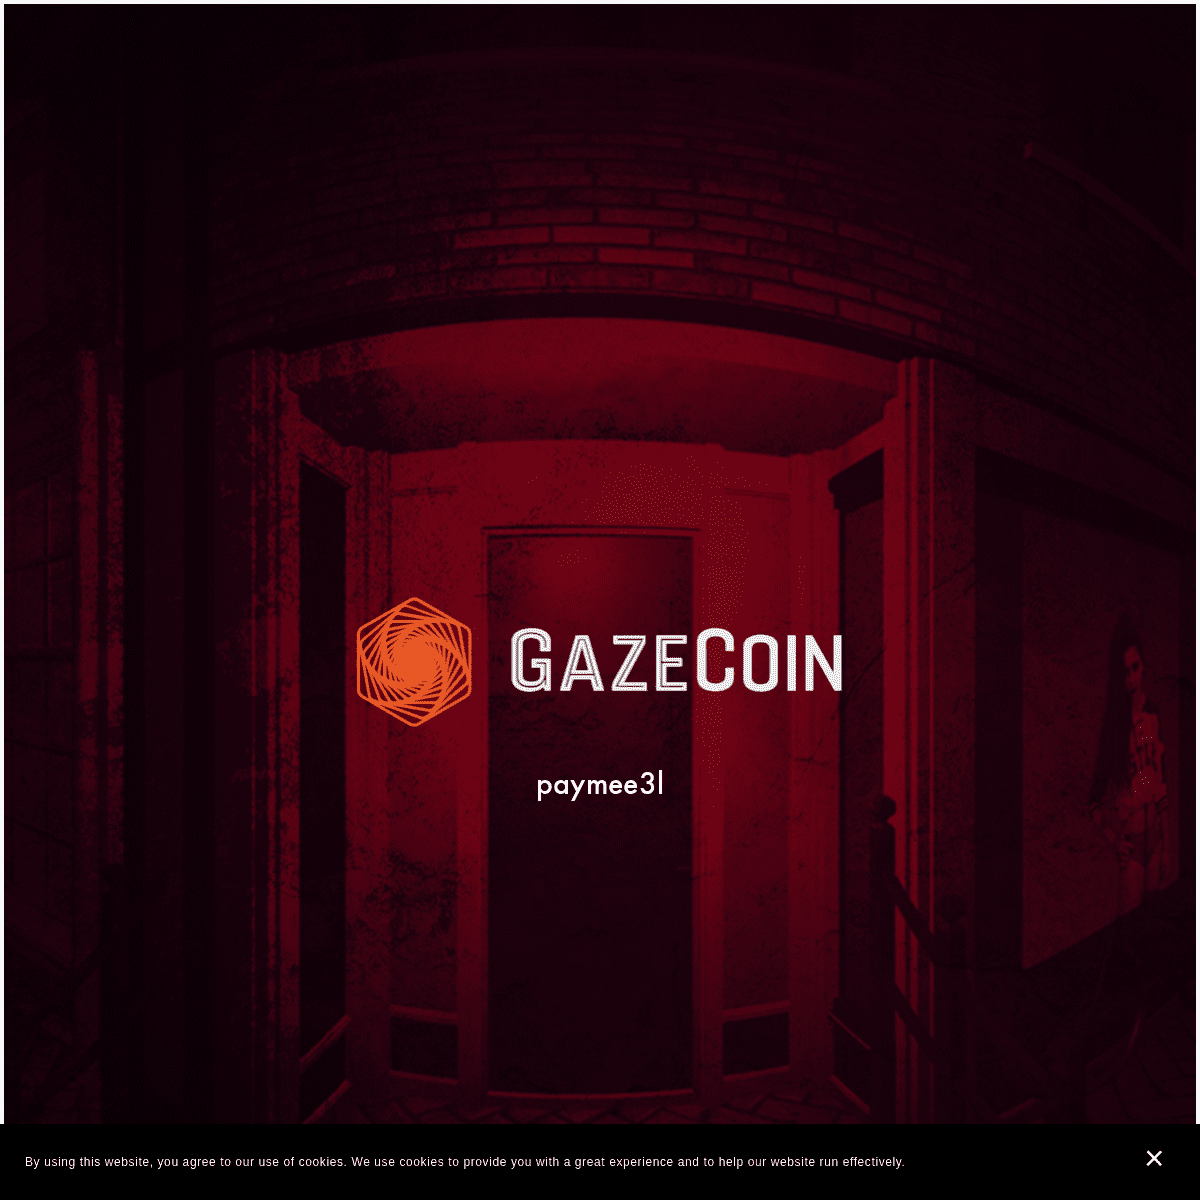 A complete backup of https://gazecoin.io